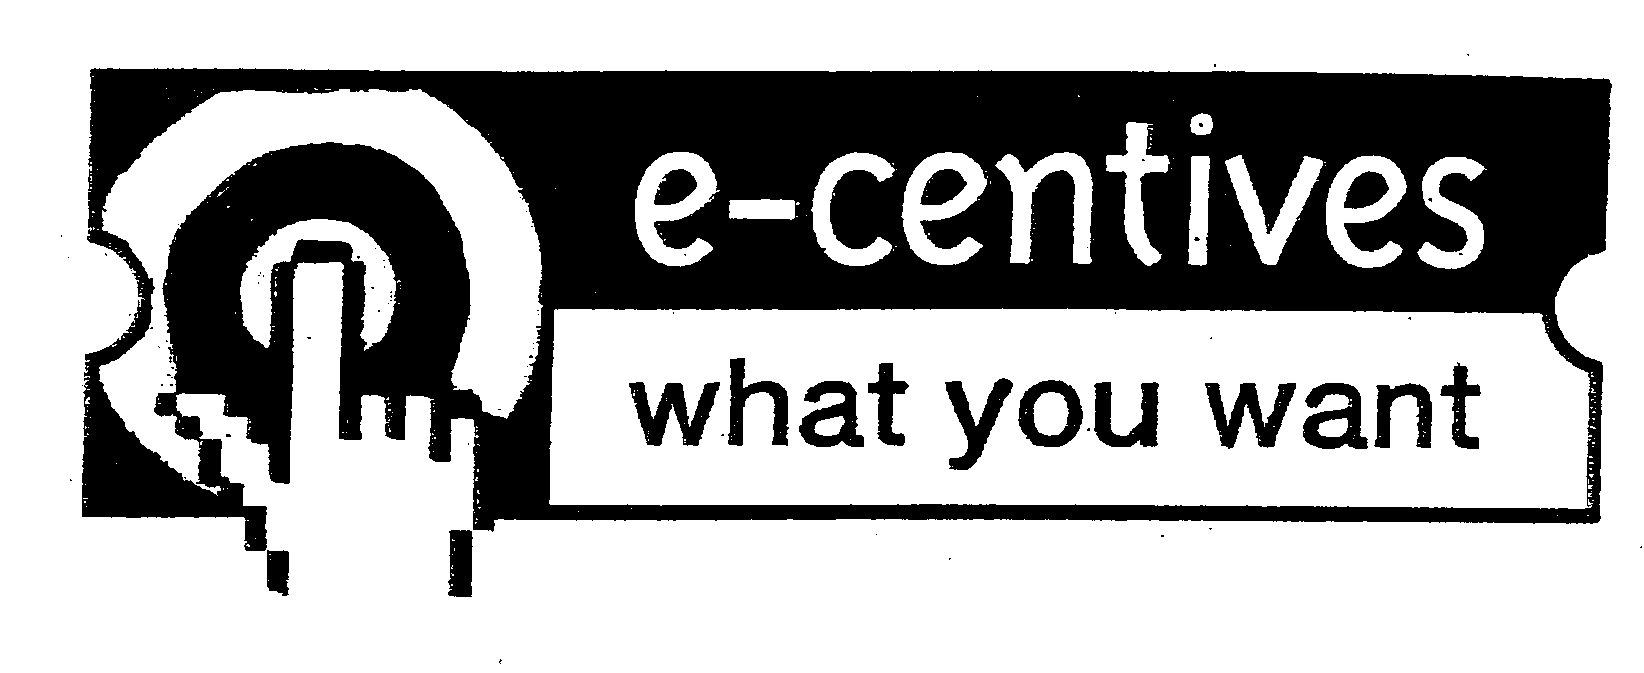  E-CENTIVES WHAT YOU WANT